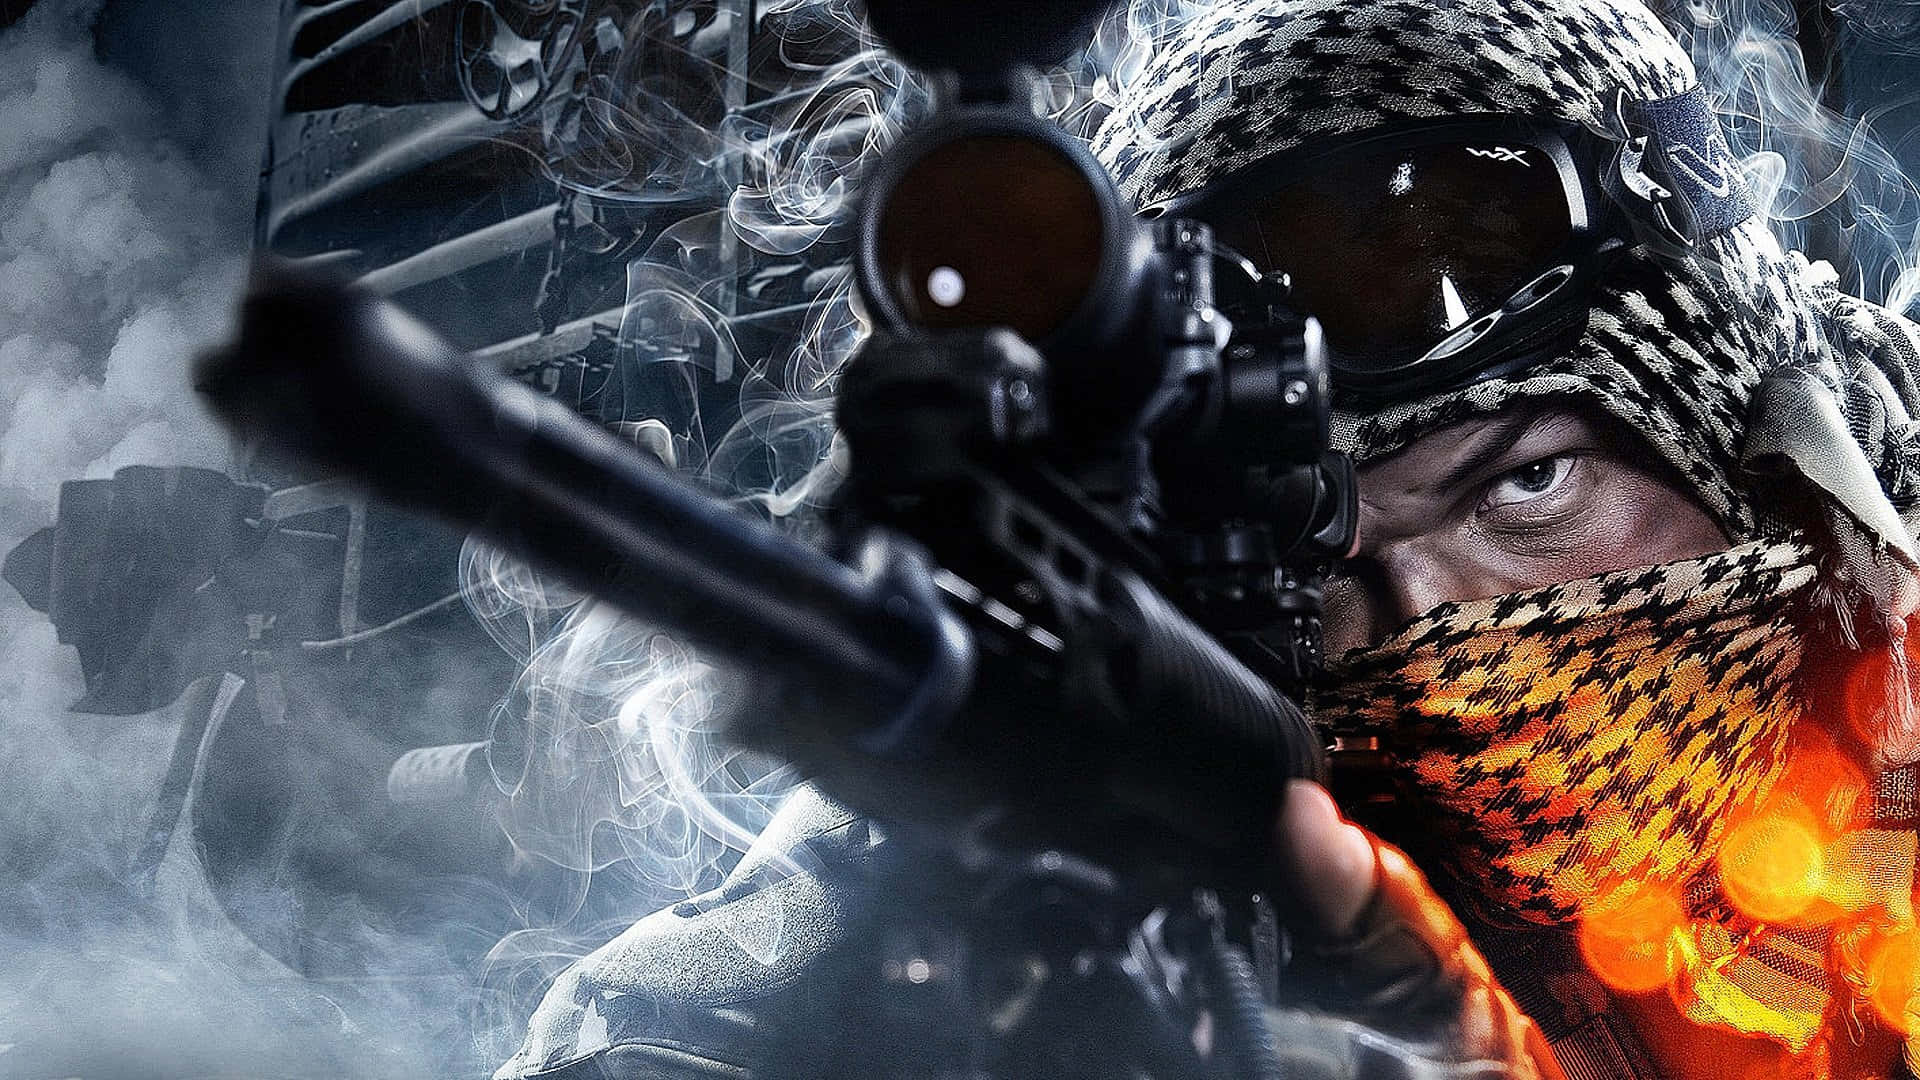 Feel the chaos of modern warfare and relentless combat in Battlefield 4